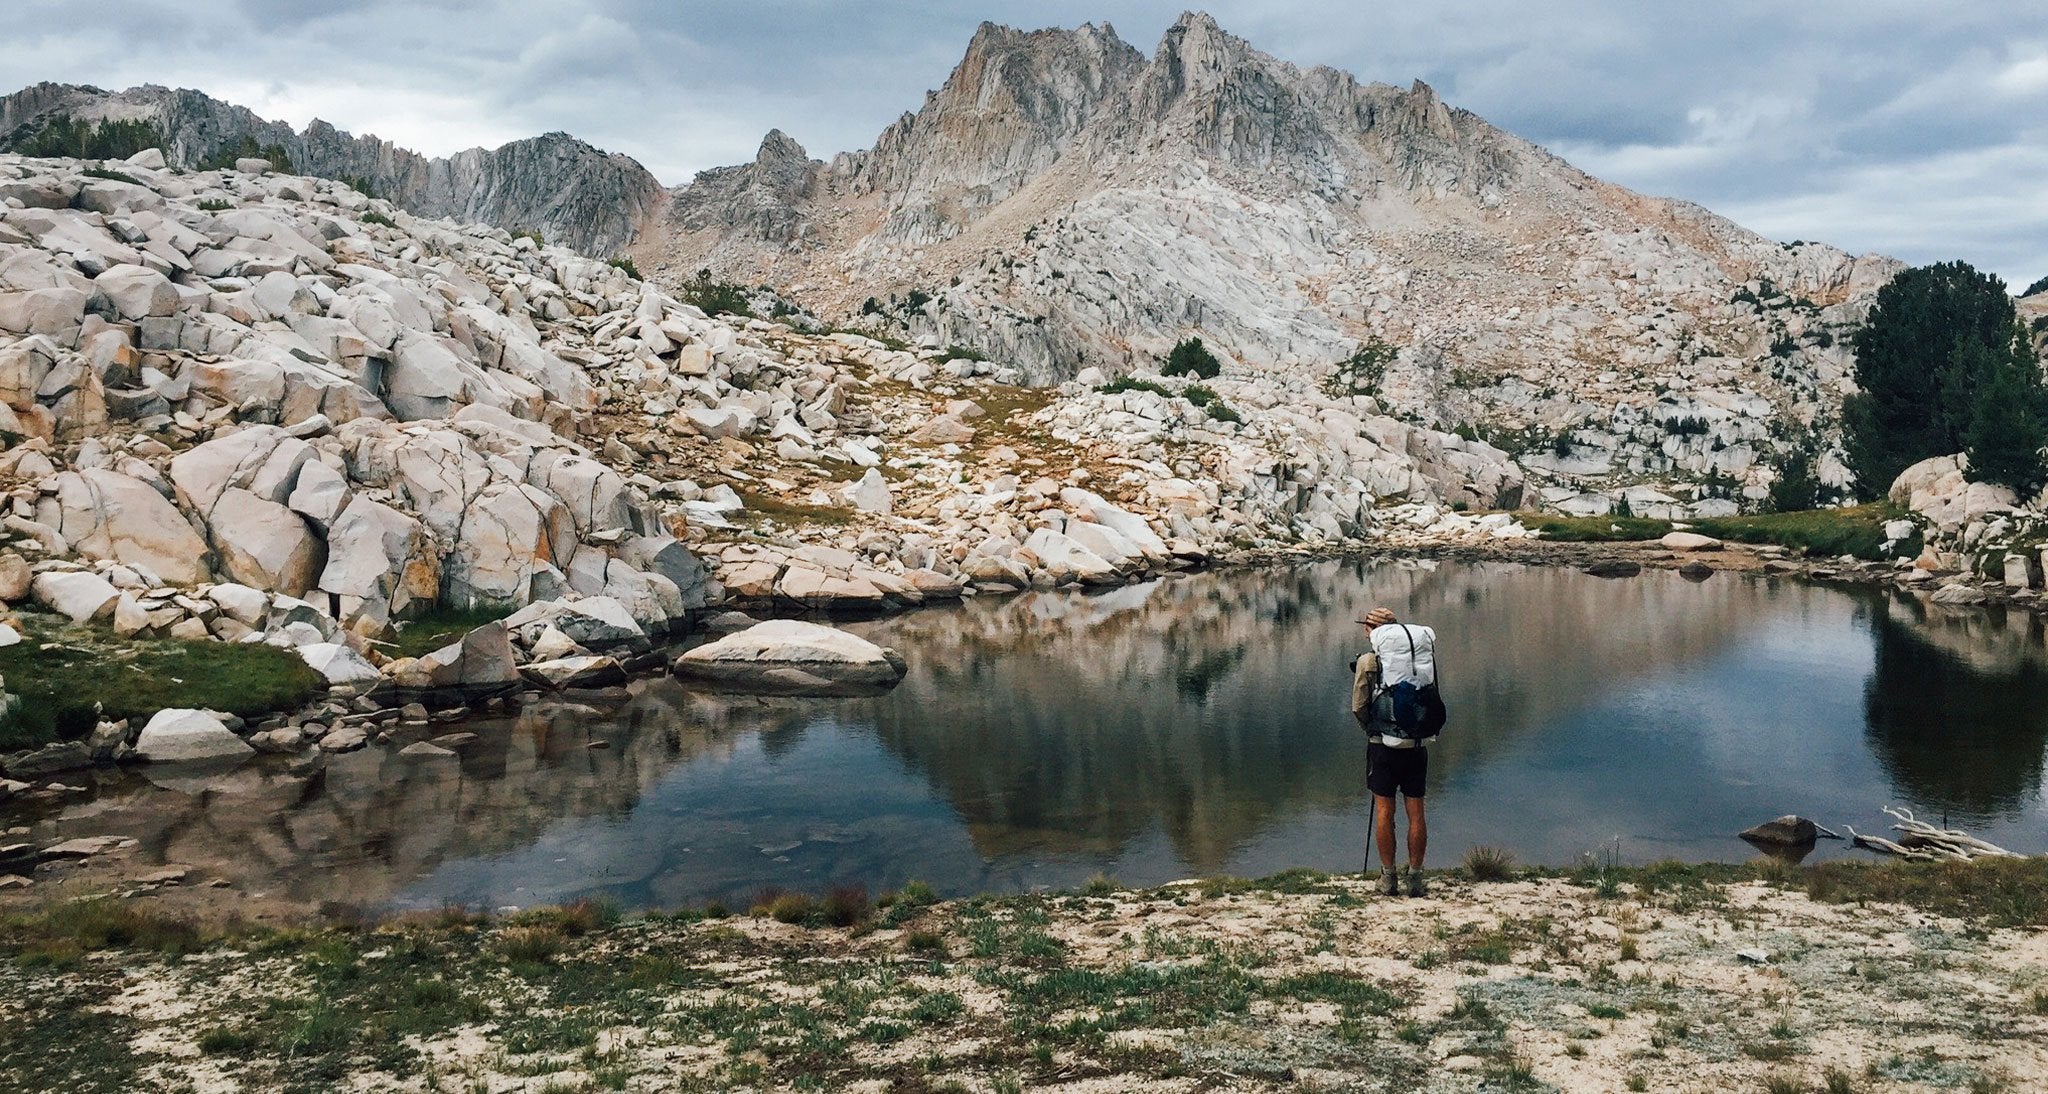 Taking the Route Not Traveled: A Starter Guide to Wilderness Backpacking